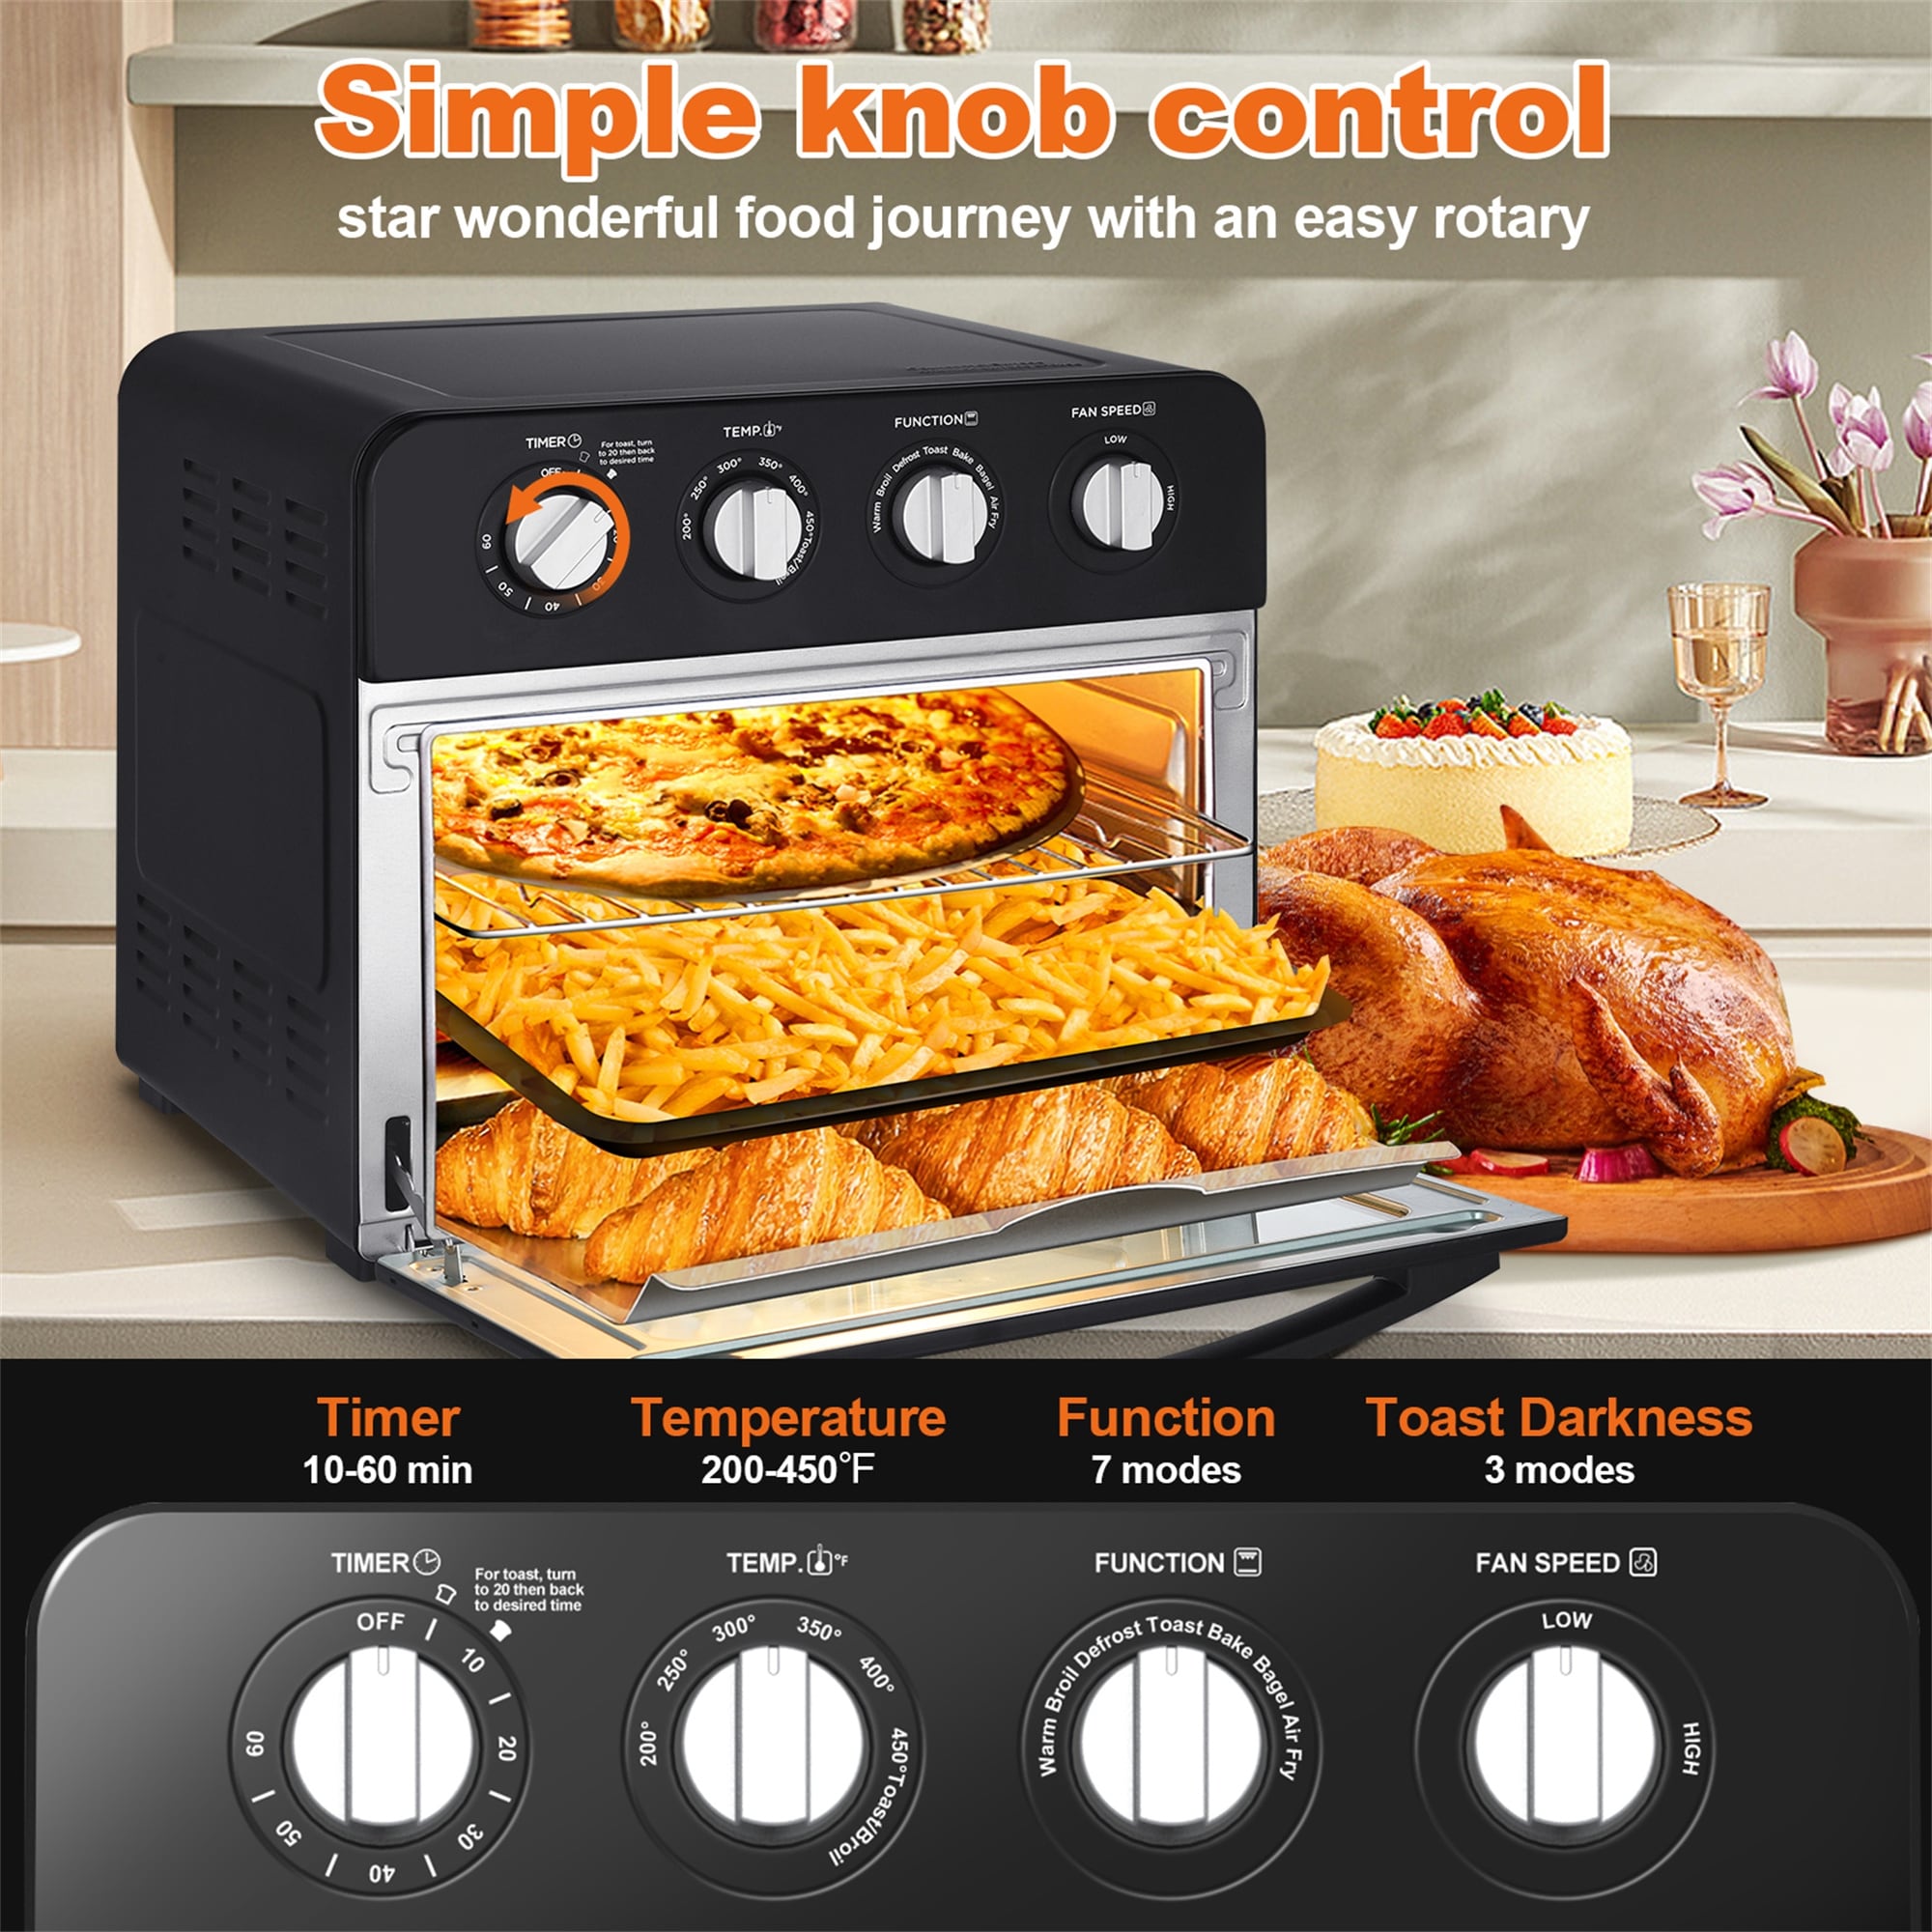 https://ak1.ostkcdn.com/images/products/is/images/direct/233af6750f49c5f146188a6b14d0c1894d46171b/Air-Fryer-Oven-%2C-Countertop-Toaster-Oven%2C-3-Rack-Levels%2C-4-mechinical-knobs%EF%BC%8CBlack-housing-with-single-glass-door%2824-QT-1700W%29.jpg